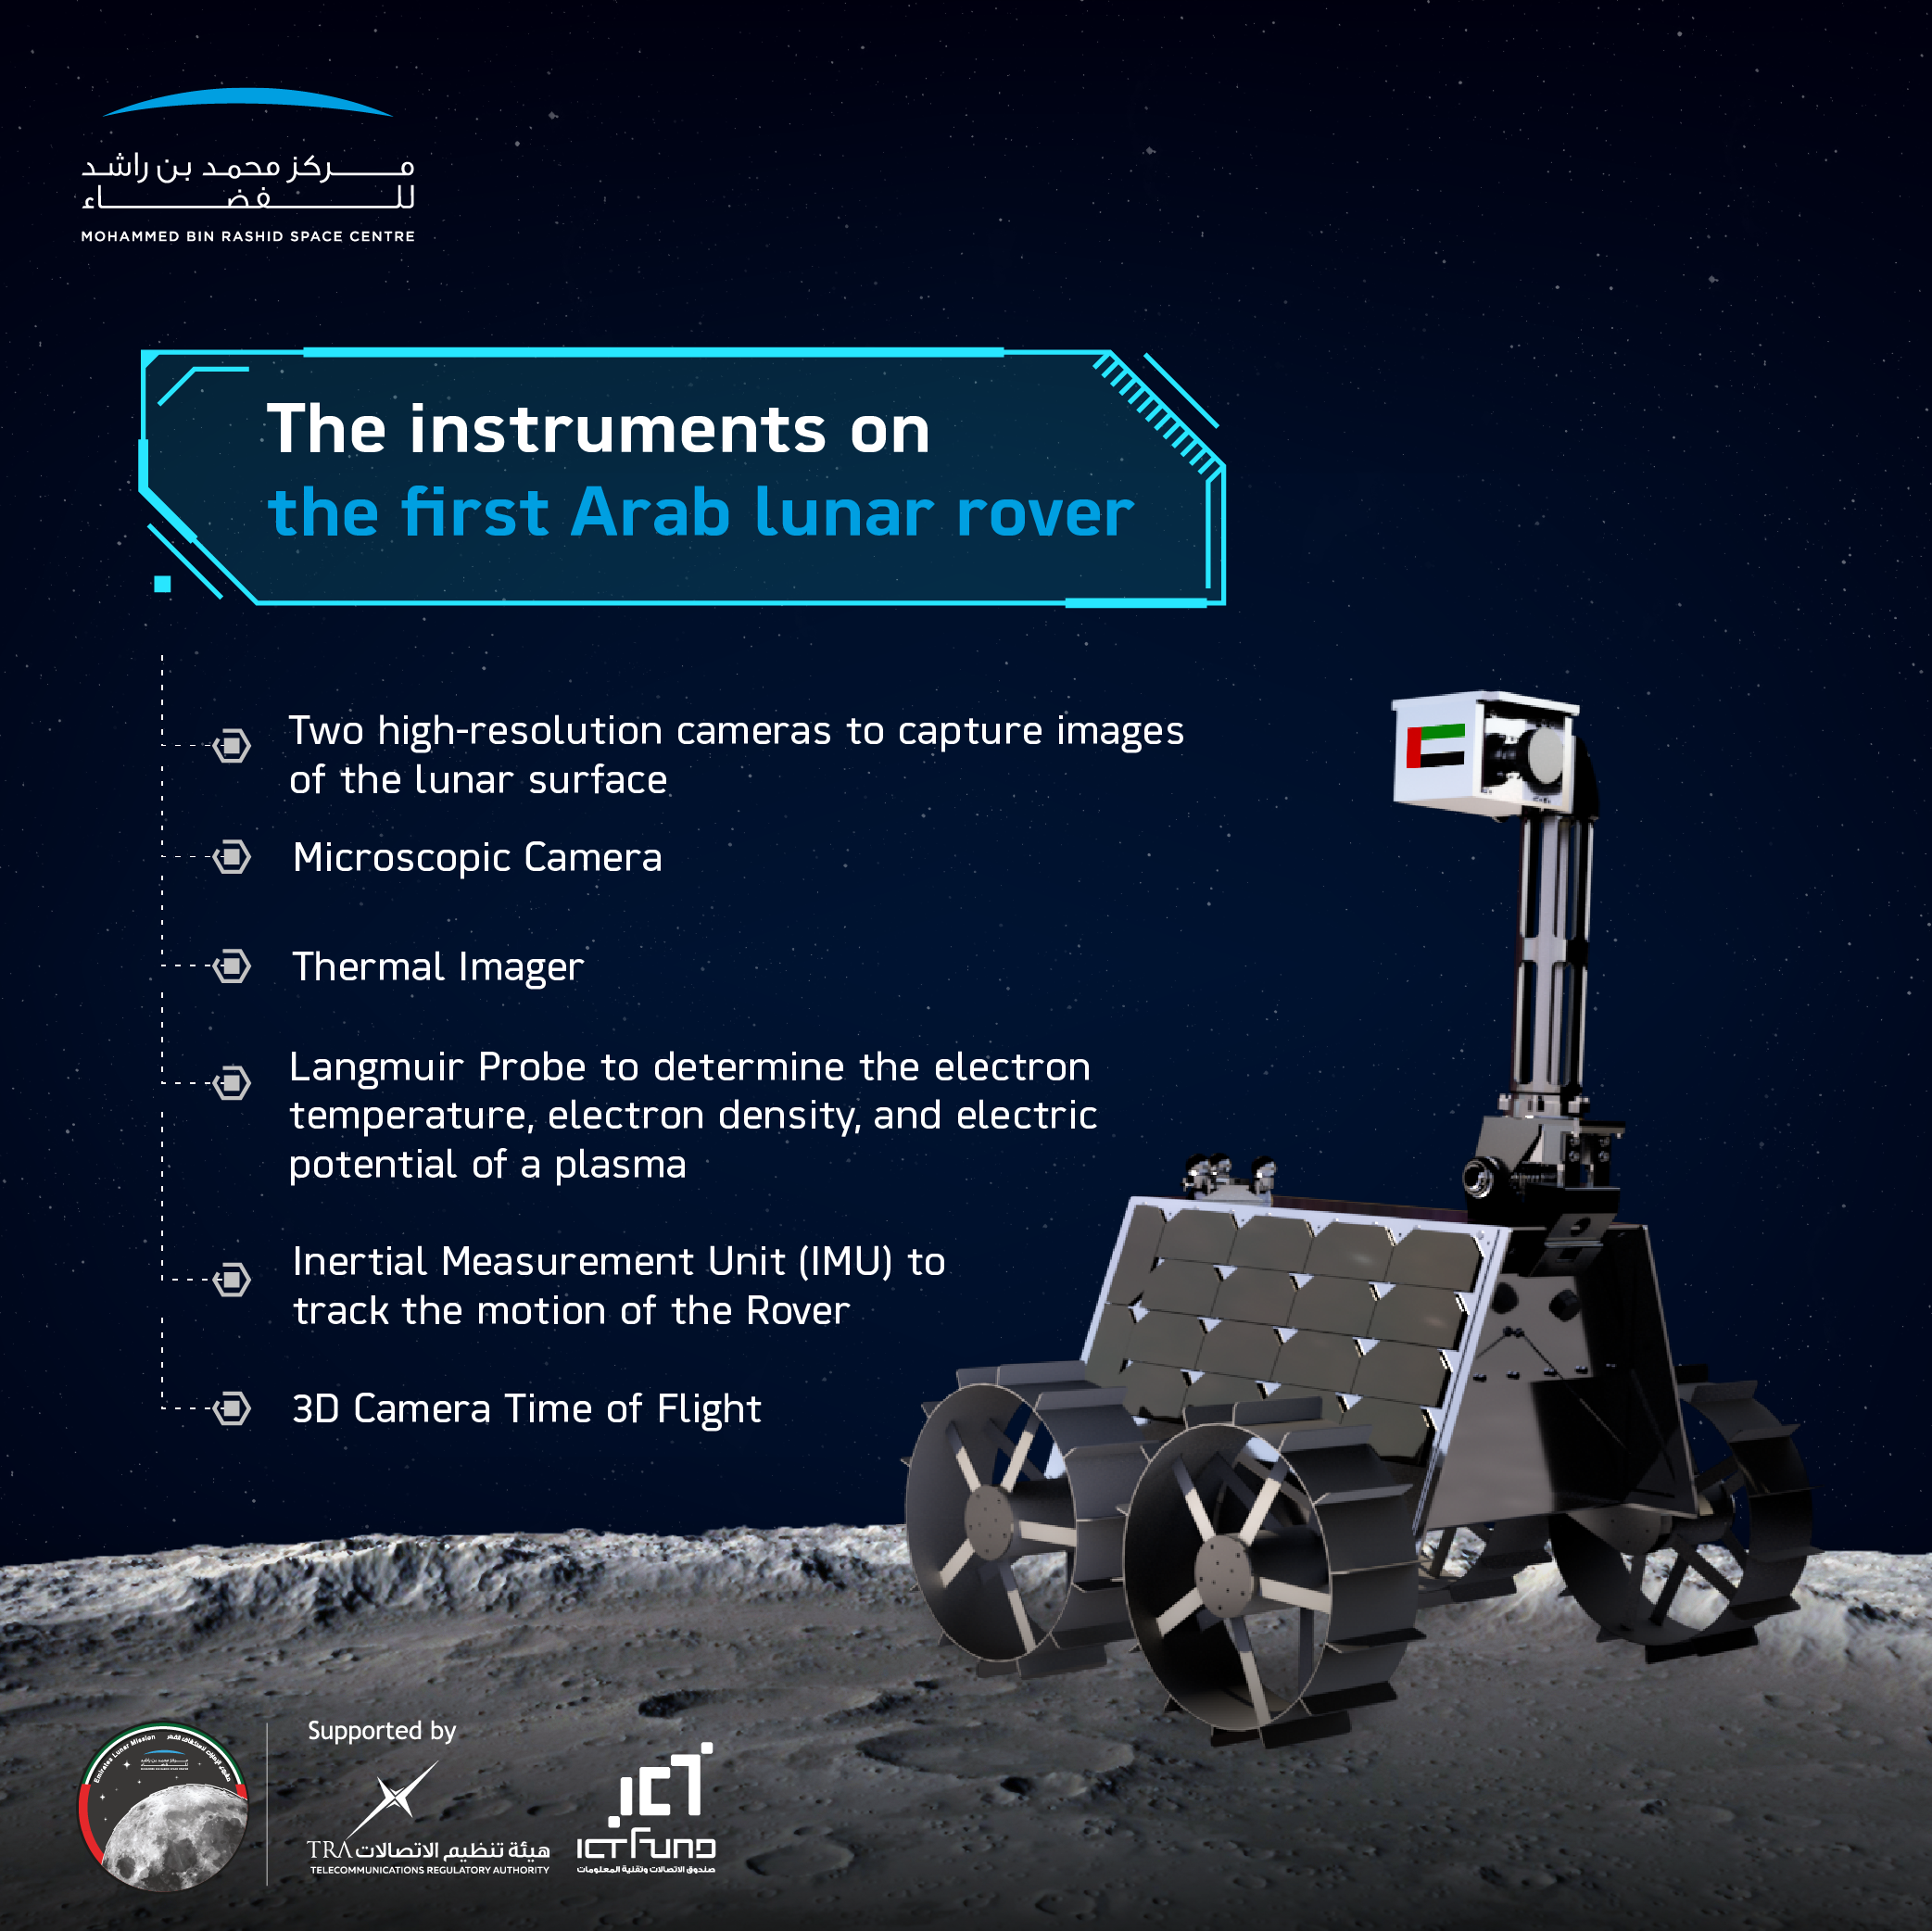 An artist's depiction of the UAE's planned lunar rover seen on the lunar surface.